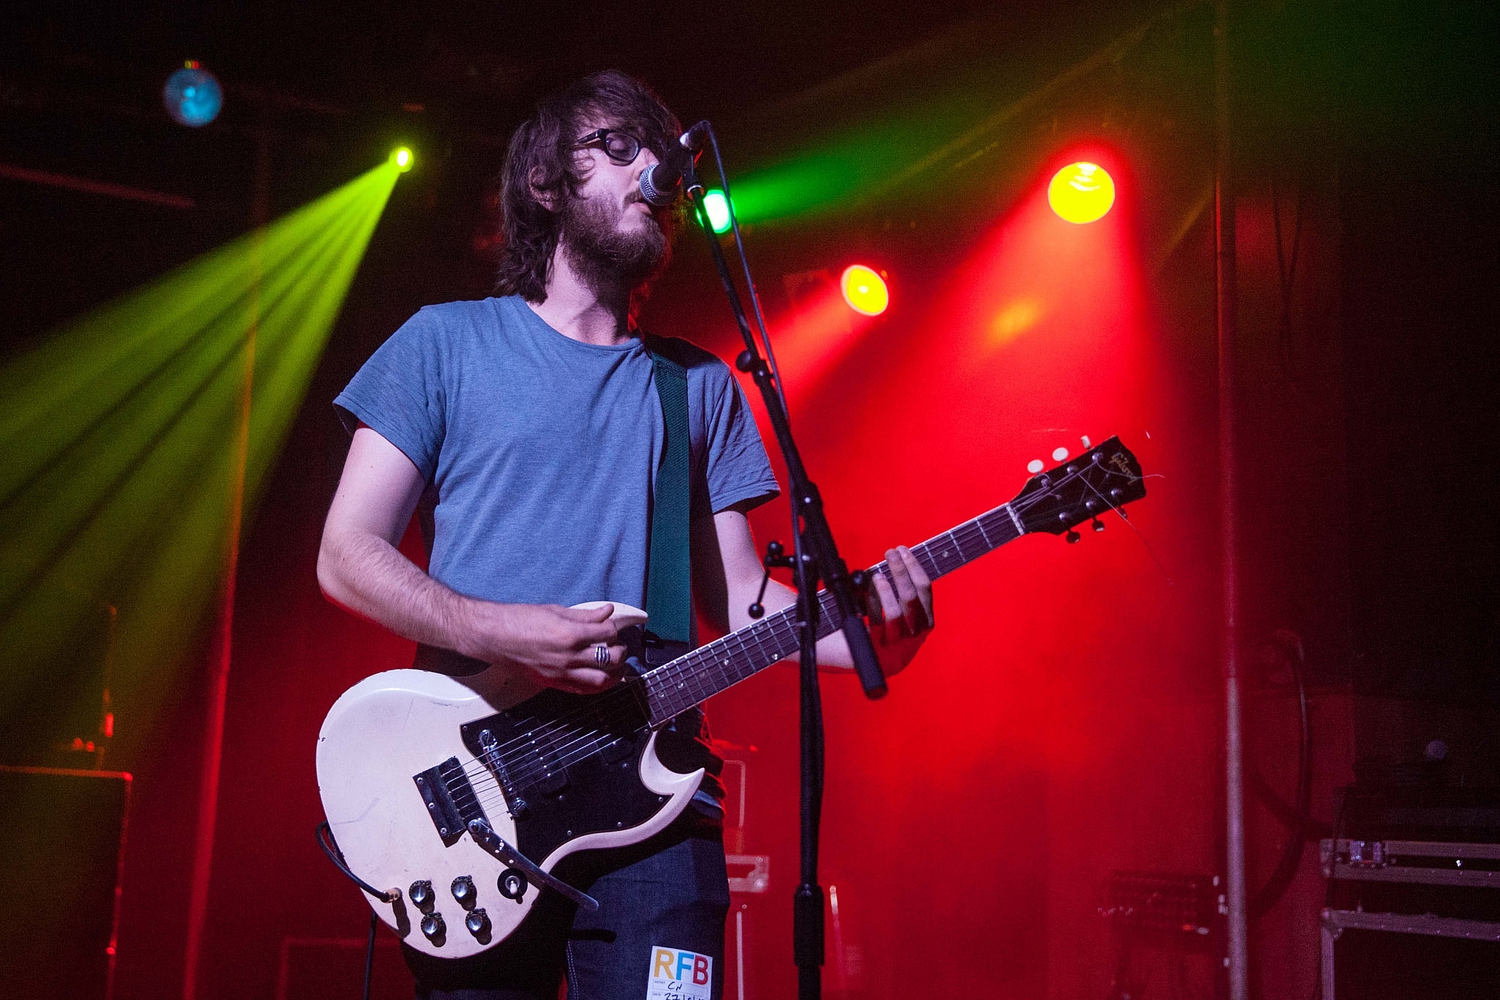 Cloud Nothings announce world tour, including UK dates